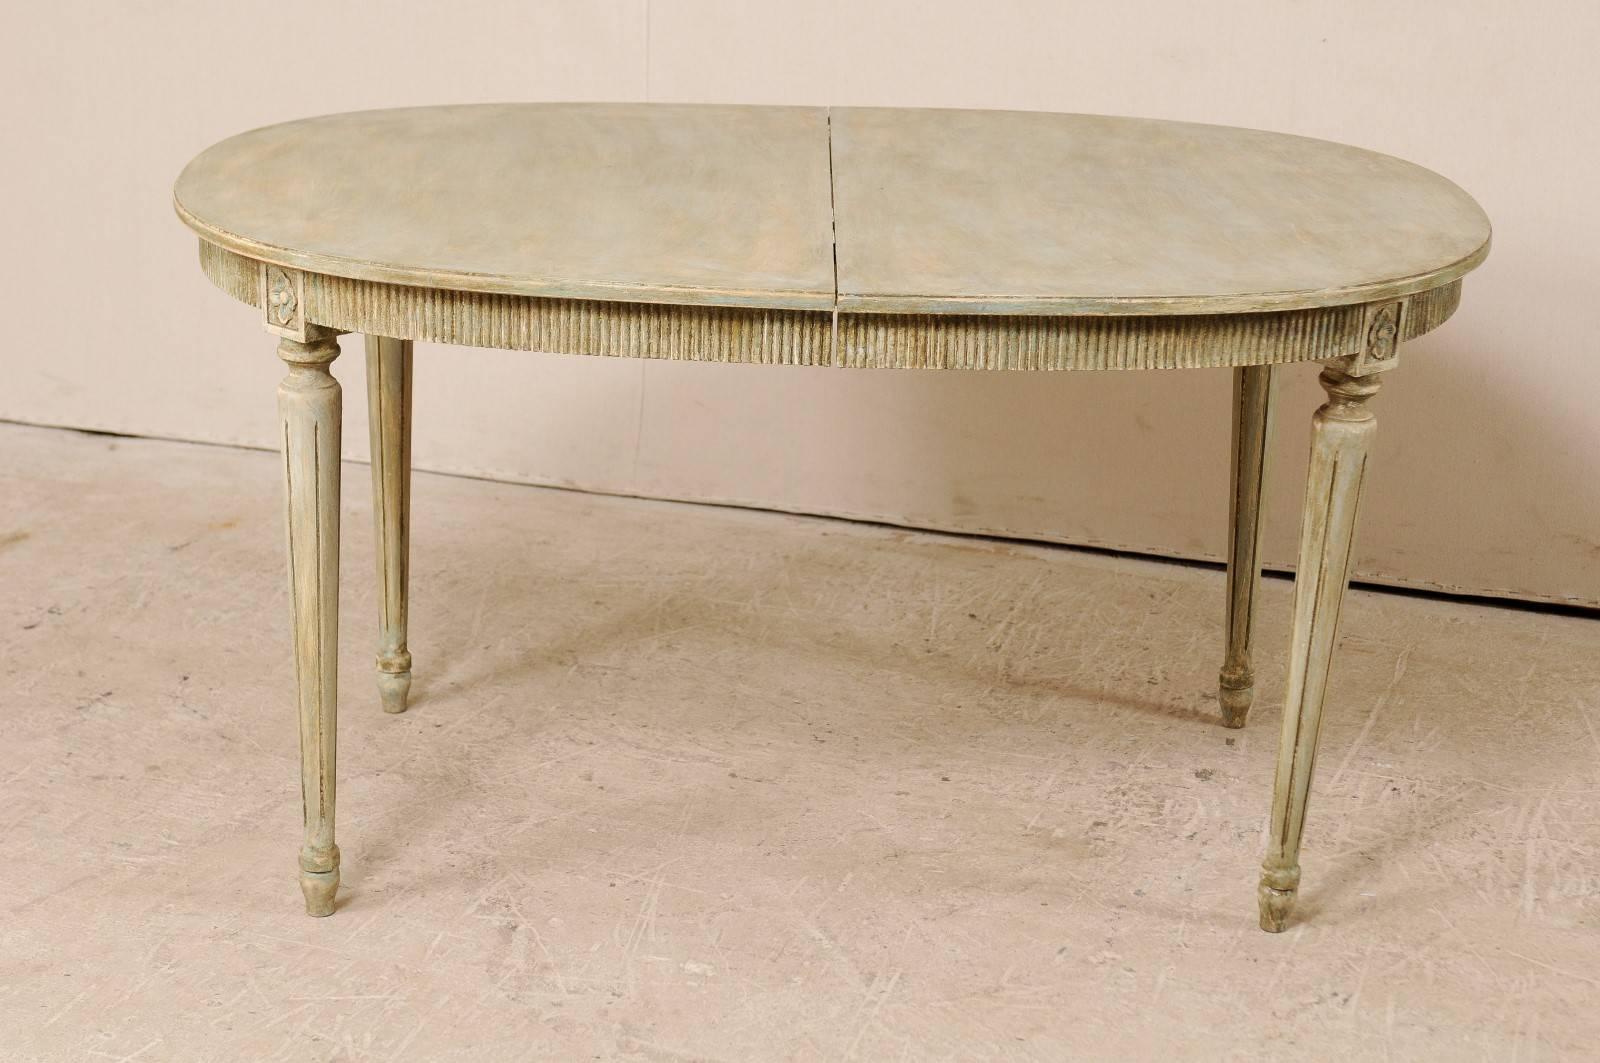 A vintage Swedish Gustavian Style painted wood table. This Swedish table features an oval-shaped top, and a reeded apron with carved rosette accent pieces above which are above each of its four rounds, fluted and gently tapered legs. The coloring is